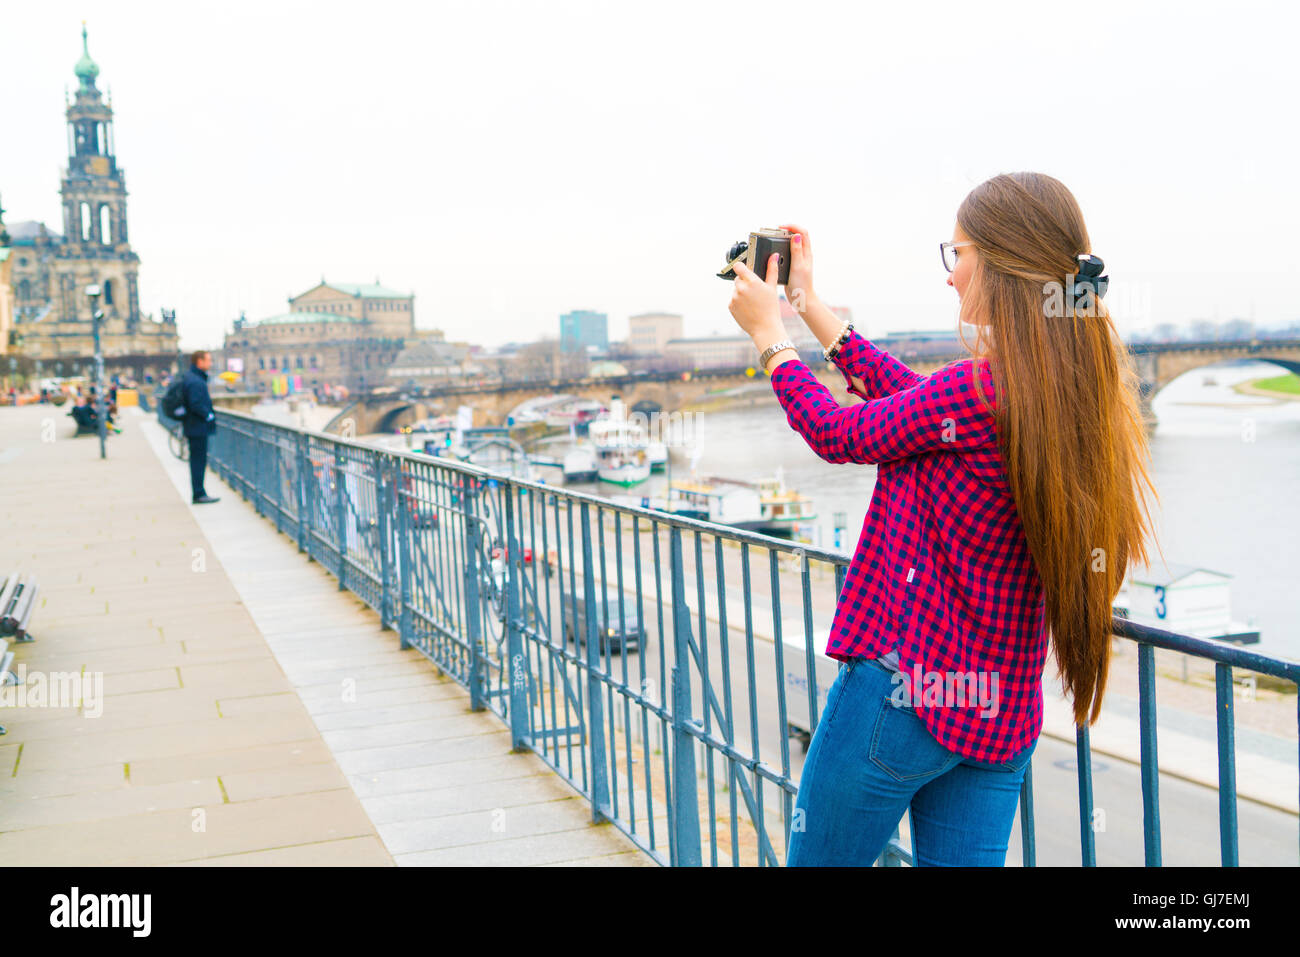 Woman tourist photographed retro camera historic part of the city, Dresden, Germany Stock Photo